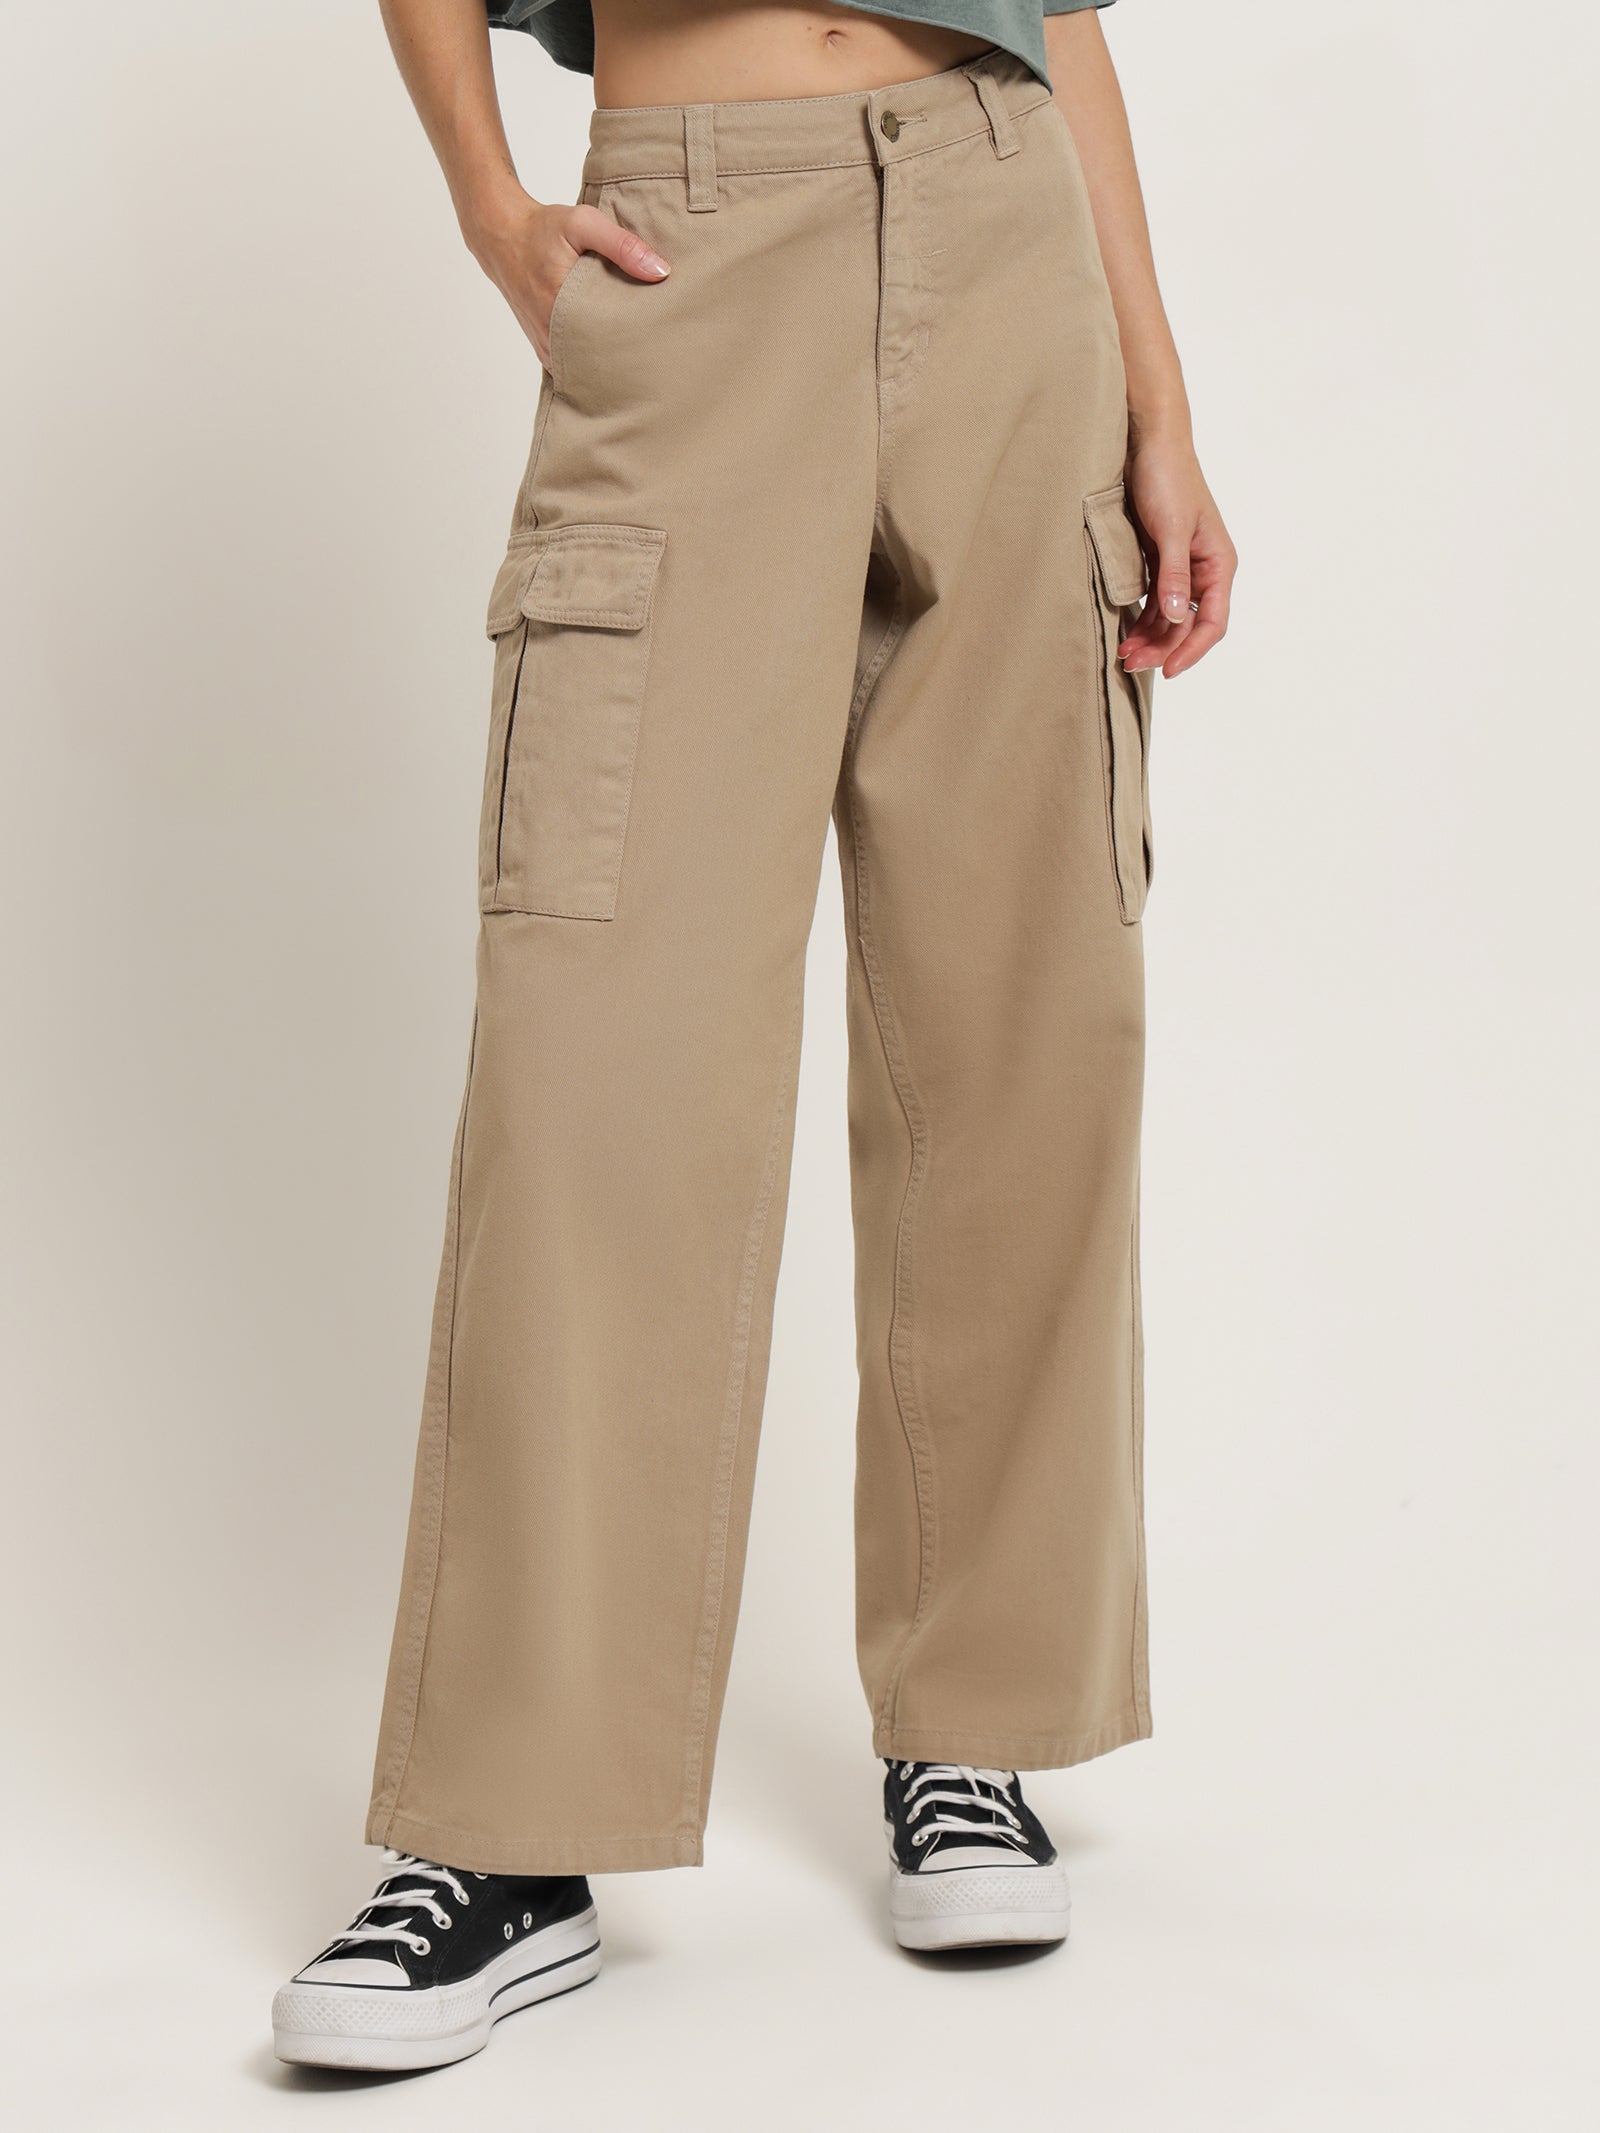 AMILIEe High Waist Cargo Pants for Women Straight Leg Cargo Trousers with  Pockets - Walmart.com